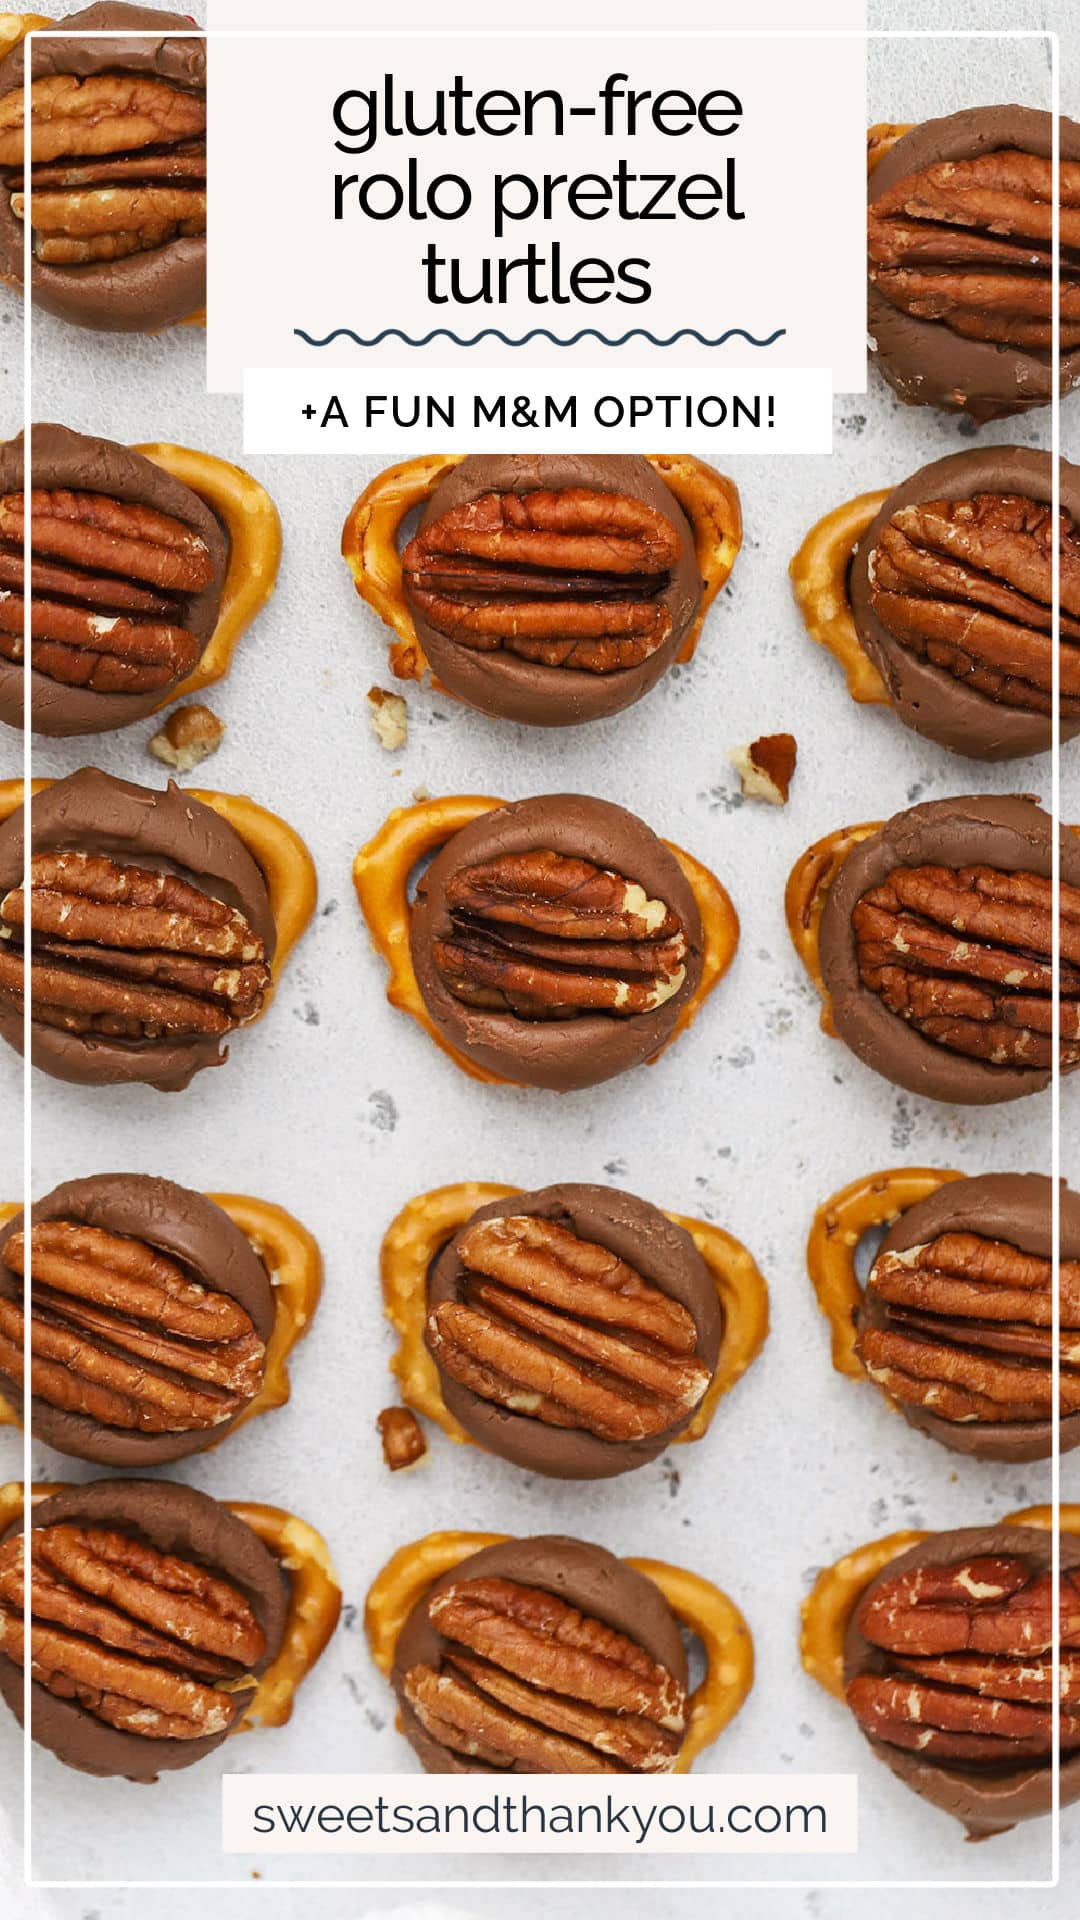 Let's make Gluten-Free Rolo Pretzels! This easy Rolo turtles recipe is the perfect easy holiday treat to add to your cookie plate this year! / gluten free rolo pretzel delights / gluten free rolo pretzel bites recipe / gluten free rolo pretzel turtles recipe / easy gluten-free holiday treat / gluten free cookie exchange recipe / gluten free holiday baking / gluten free christmas treat / gluten free rolo pretzel candy recipe